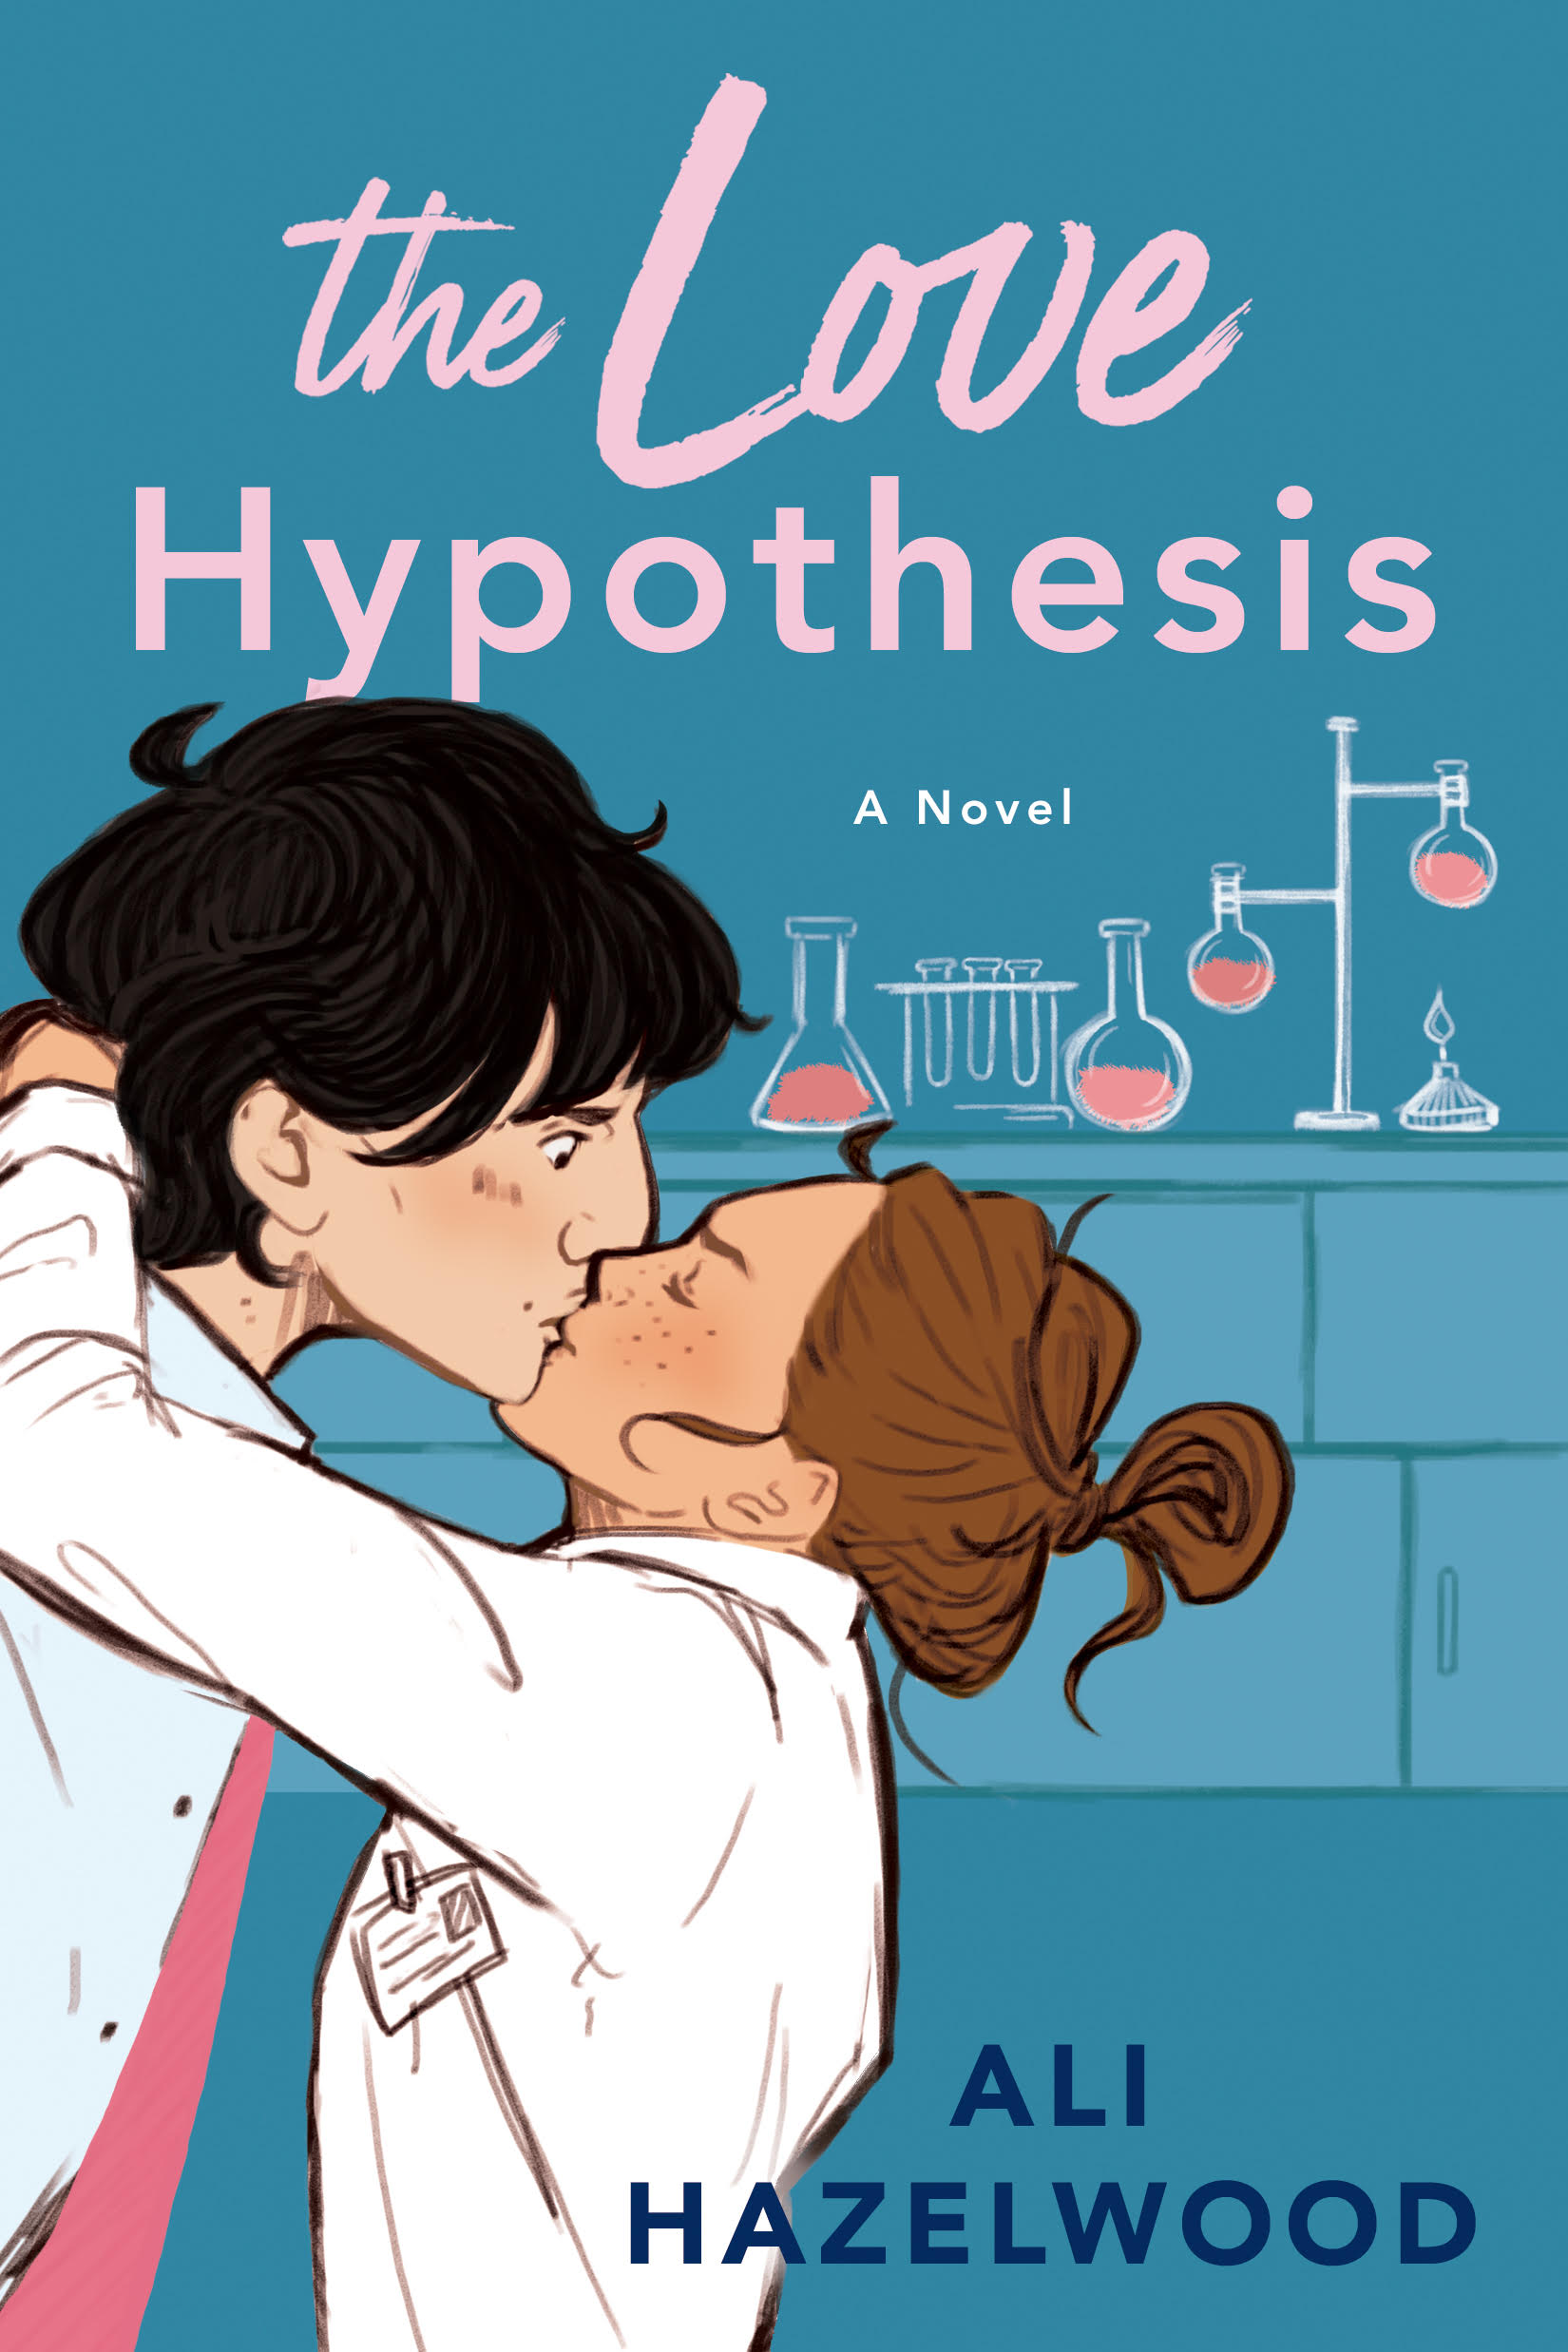 The Love Hypothesis by Ali Hazelwood book review